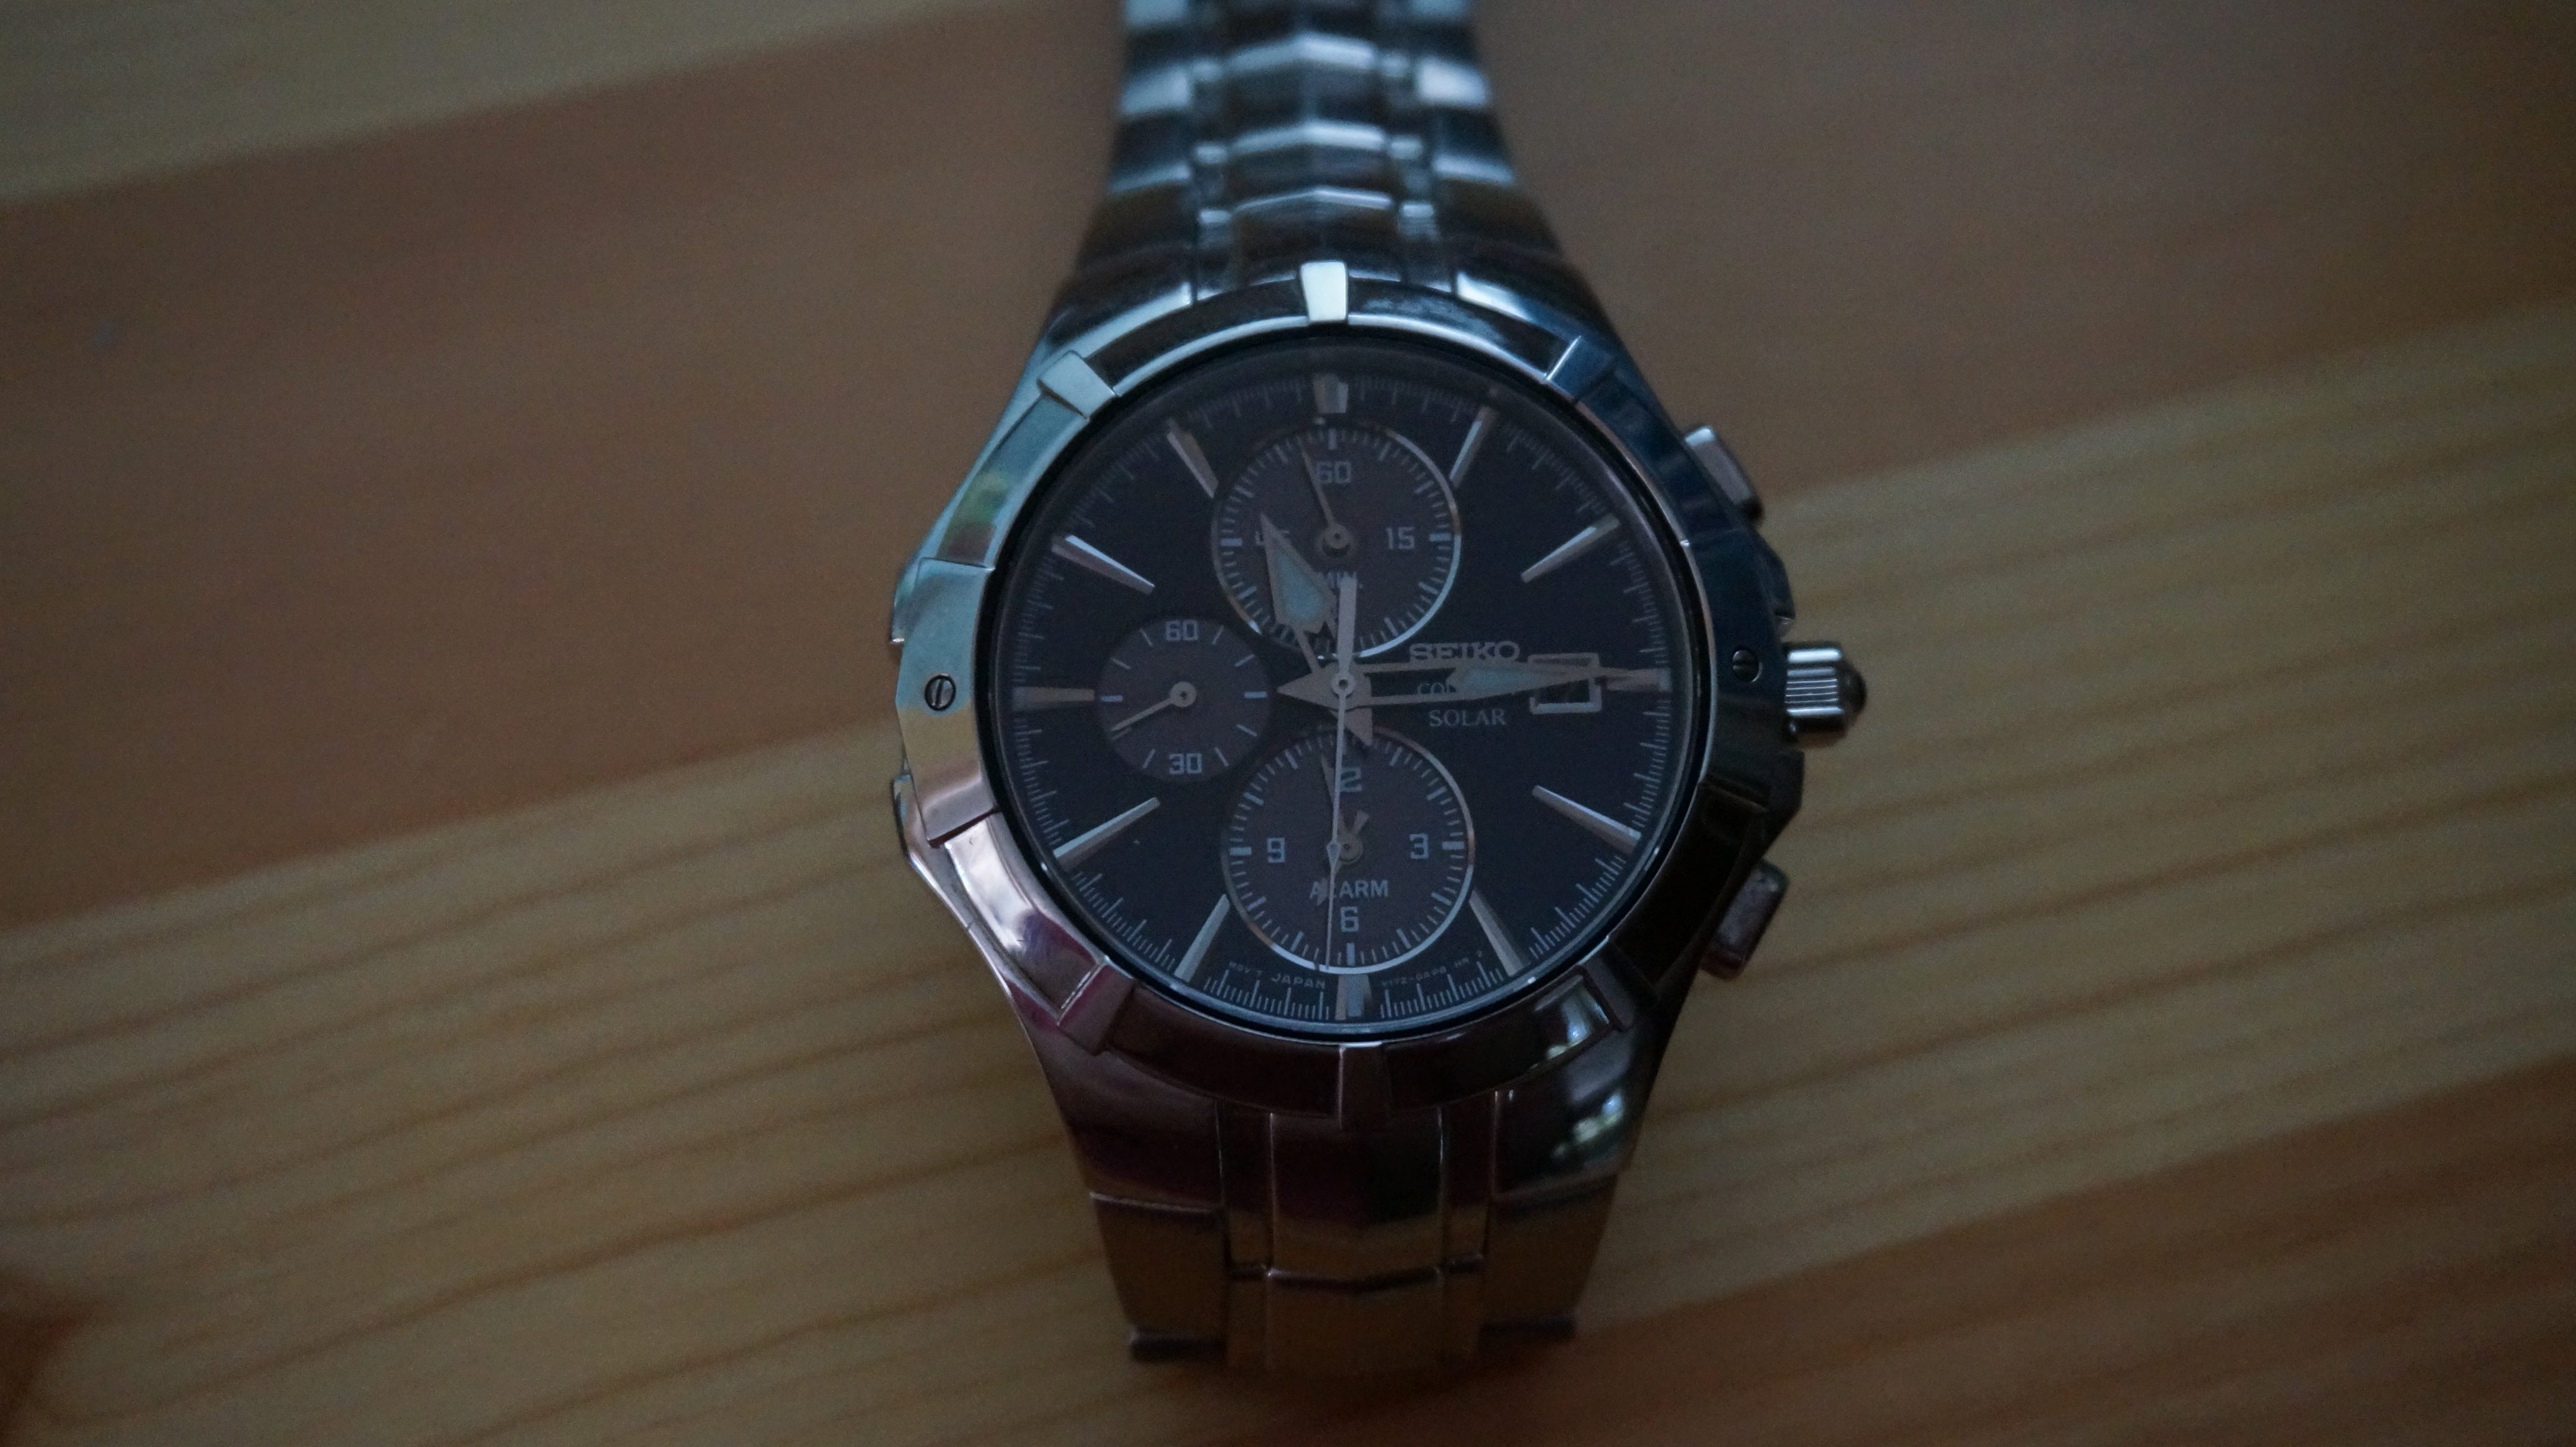 Seiko Coutura Solar v172-0am0 - Battery issue? | WatchUSeek Watch Forums